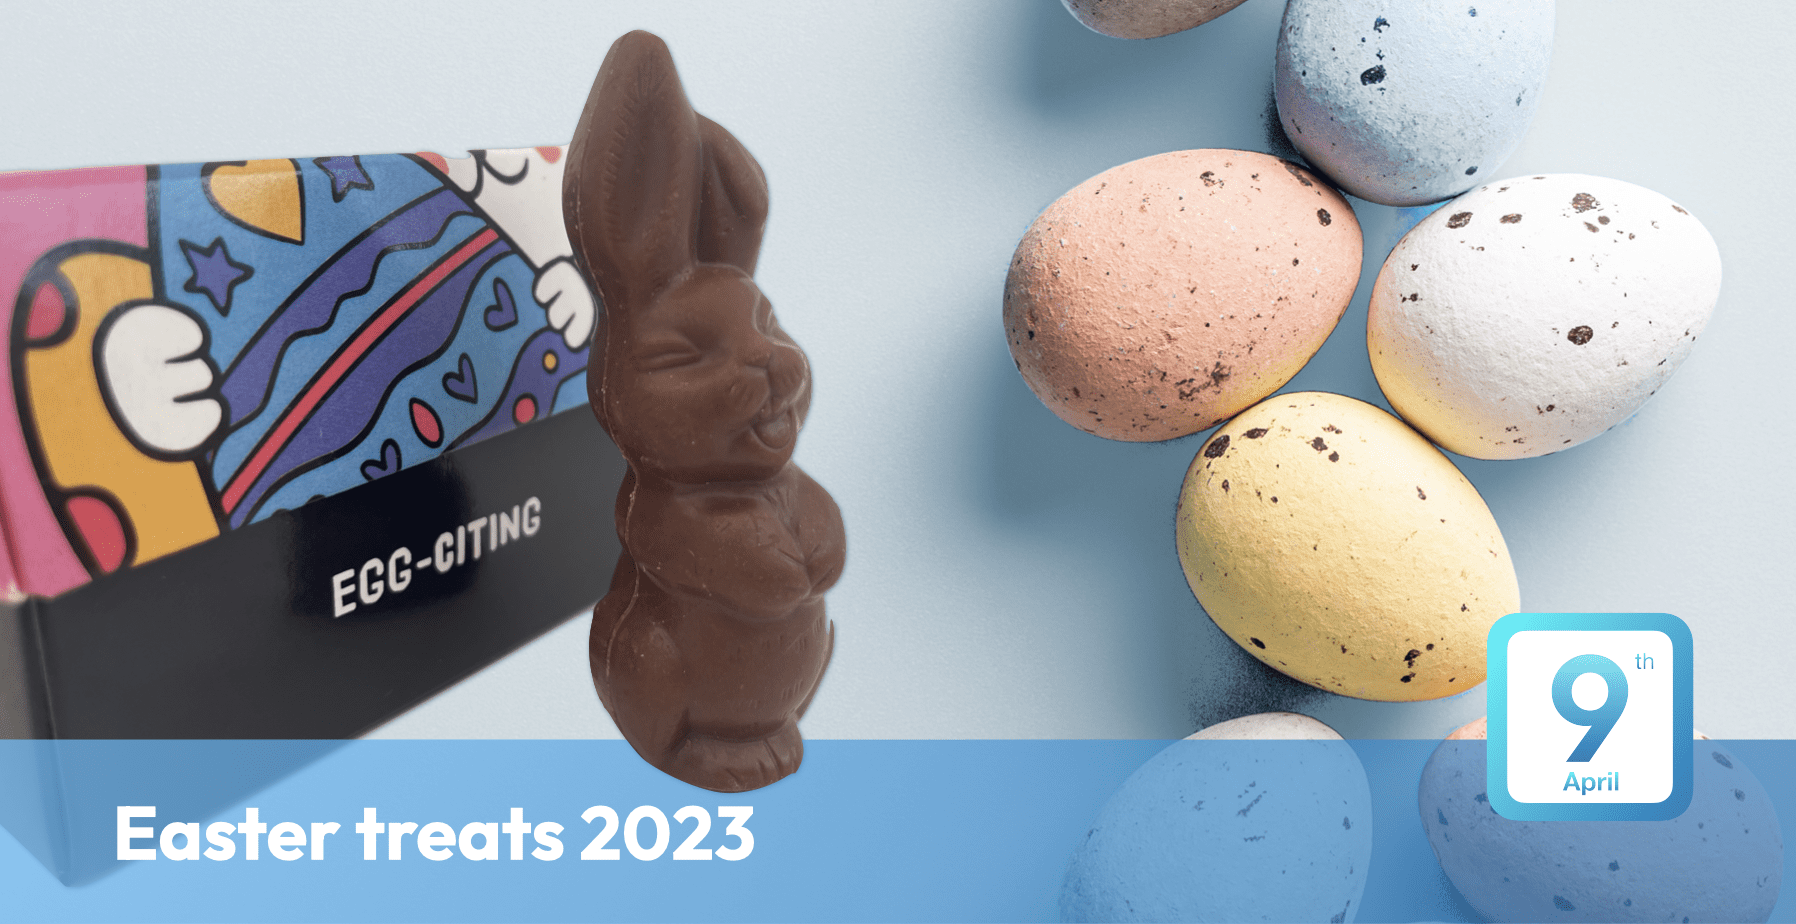 Easter product ideas from Geiger